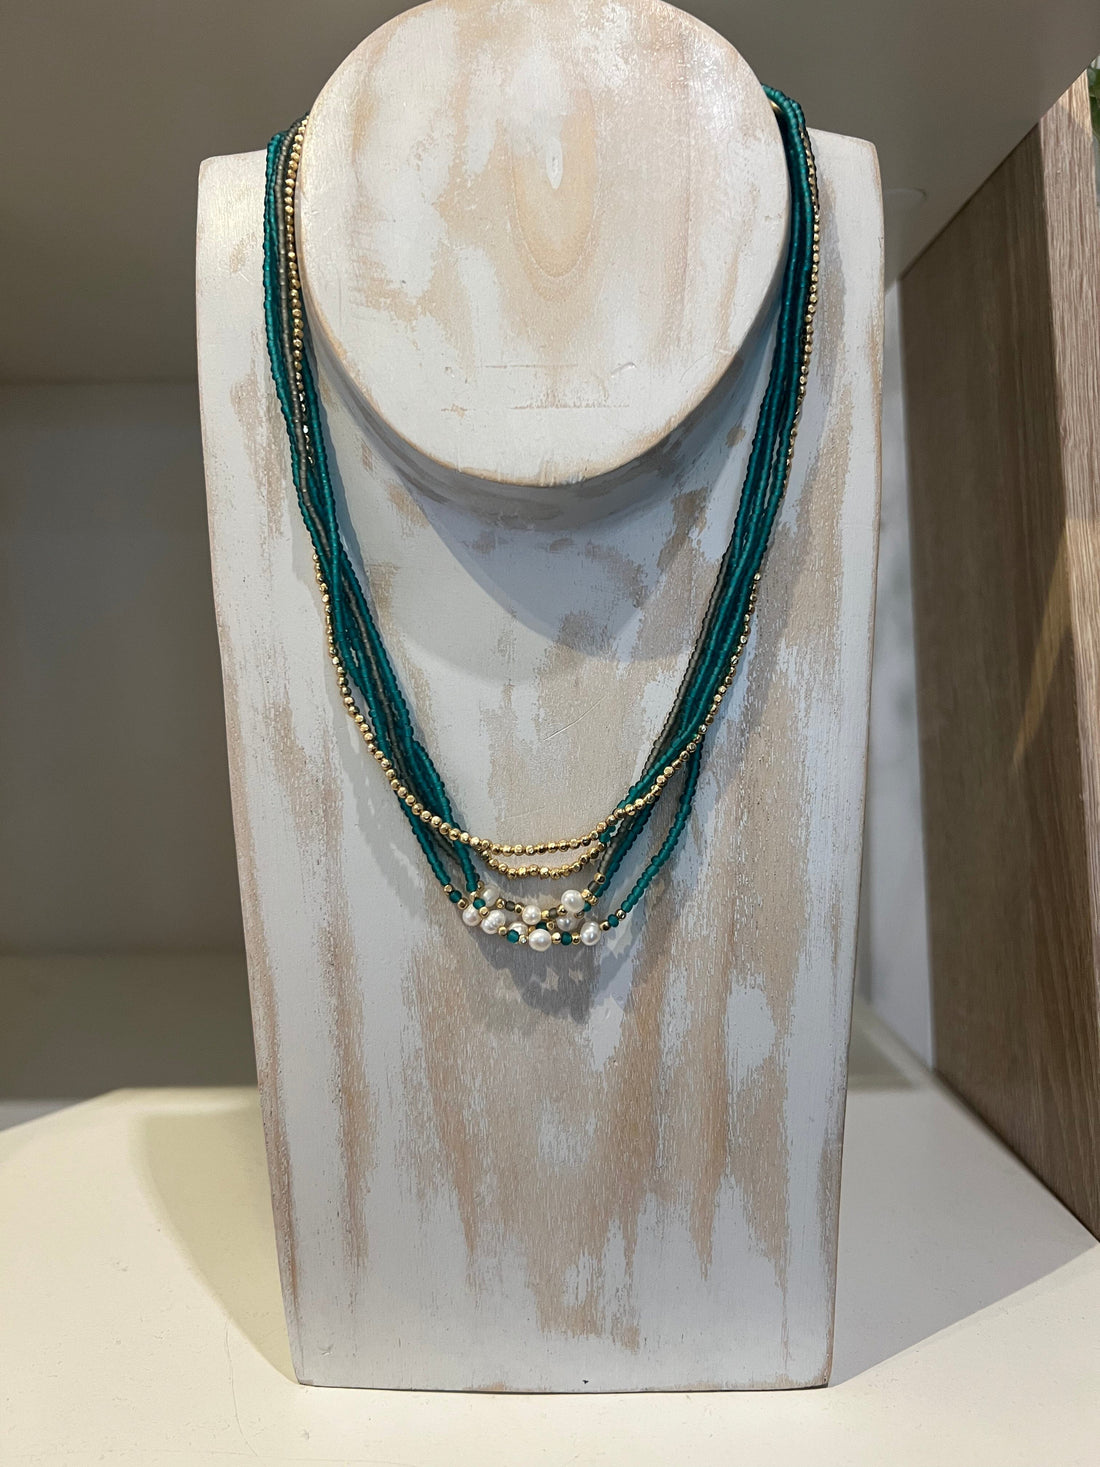 Fab Five Beaded Pearl Layered Necklace in Teal -PA301 Necklaces Hot Tomato